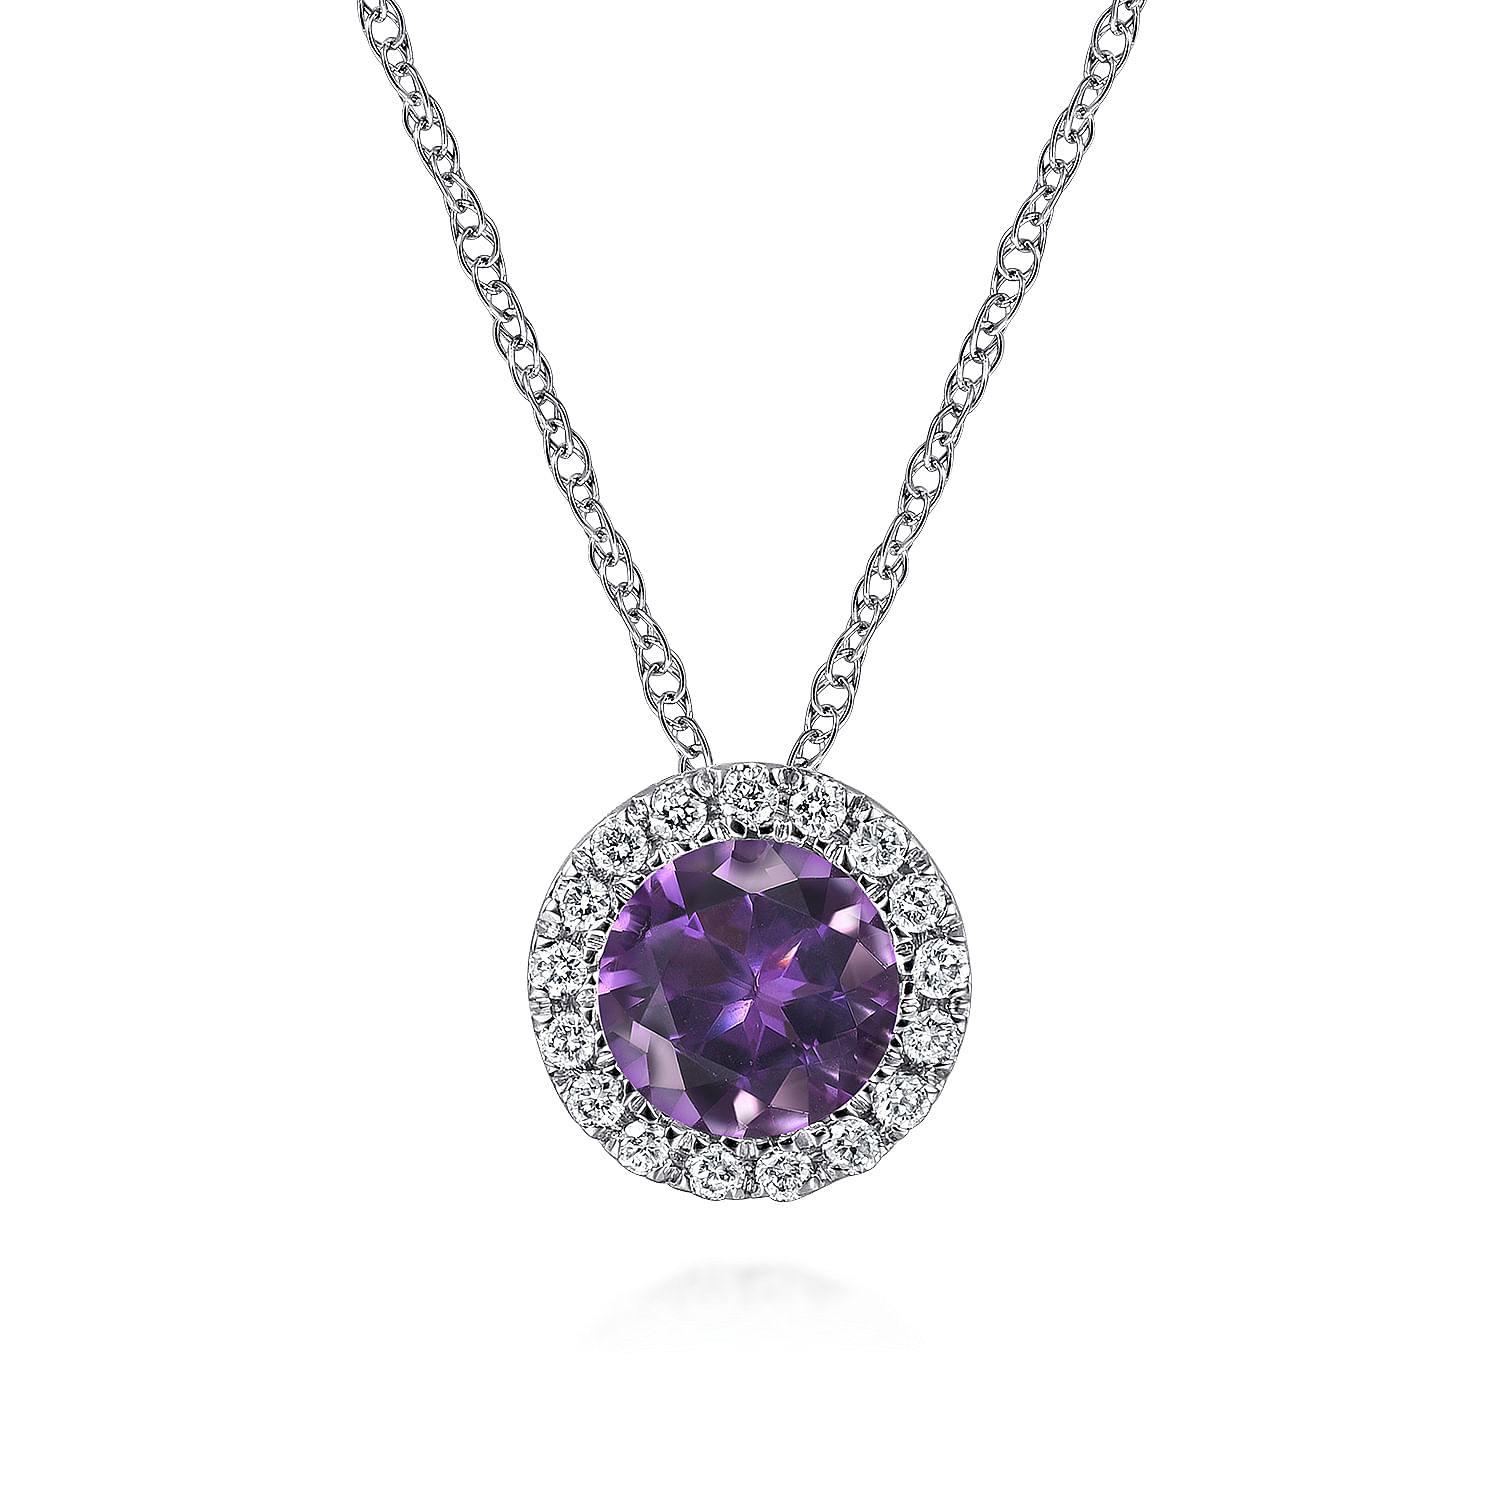 14K White Gold Amethyst and Diamond Halo Pendant Necklace